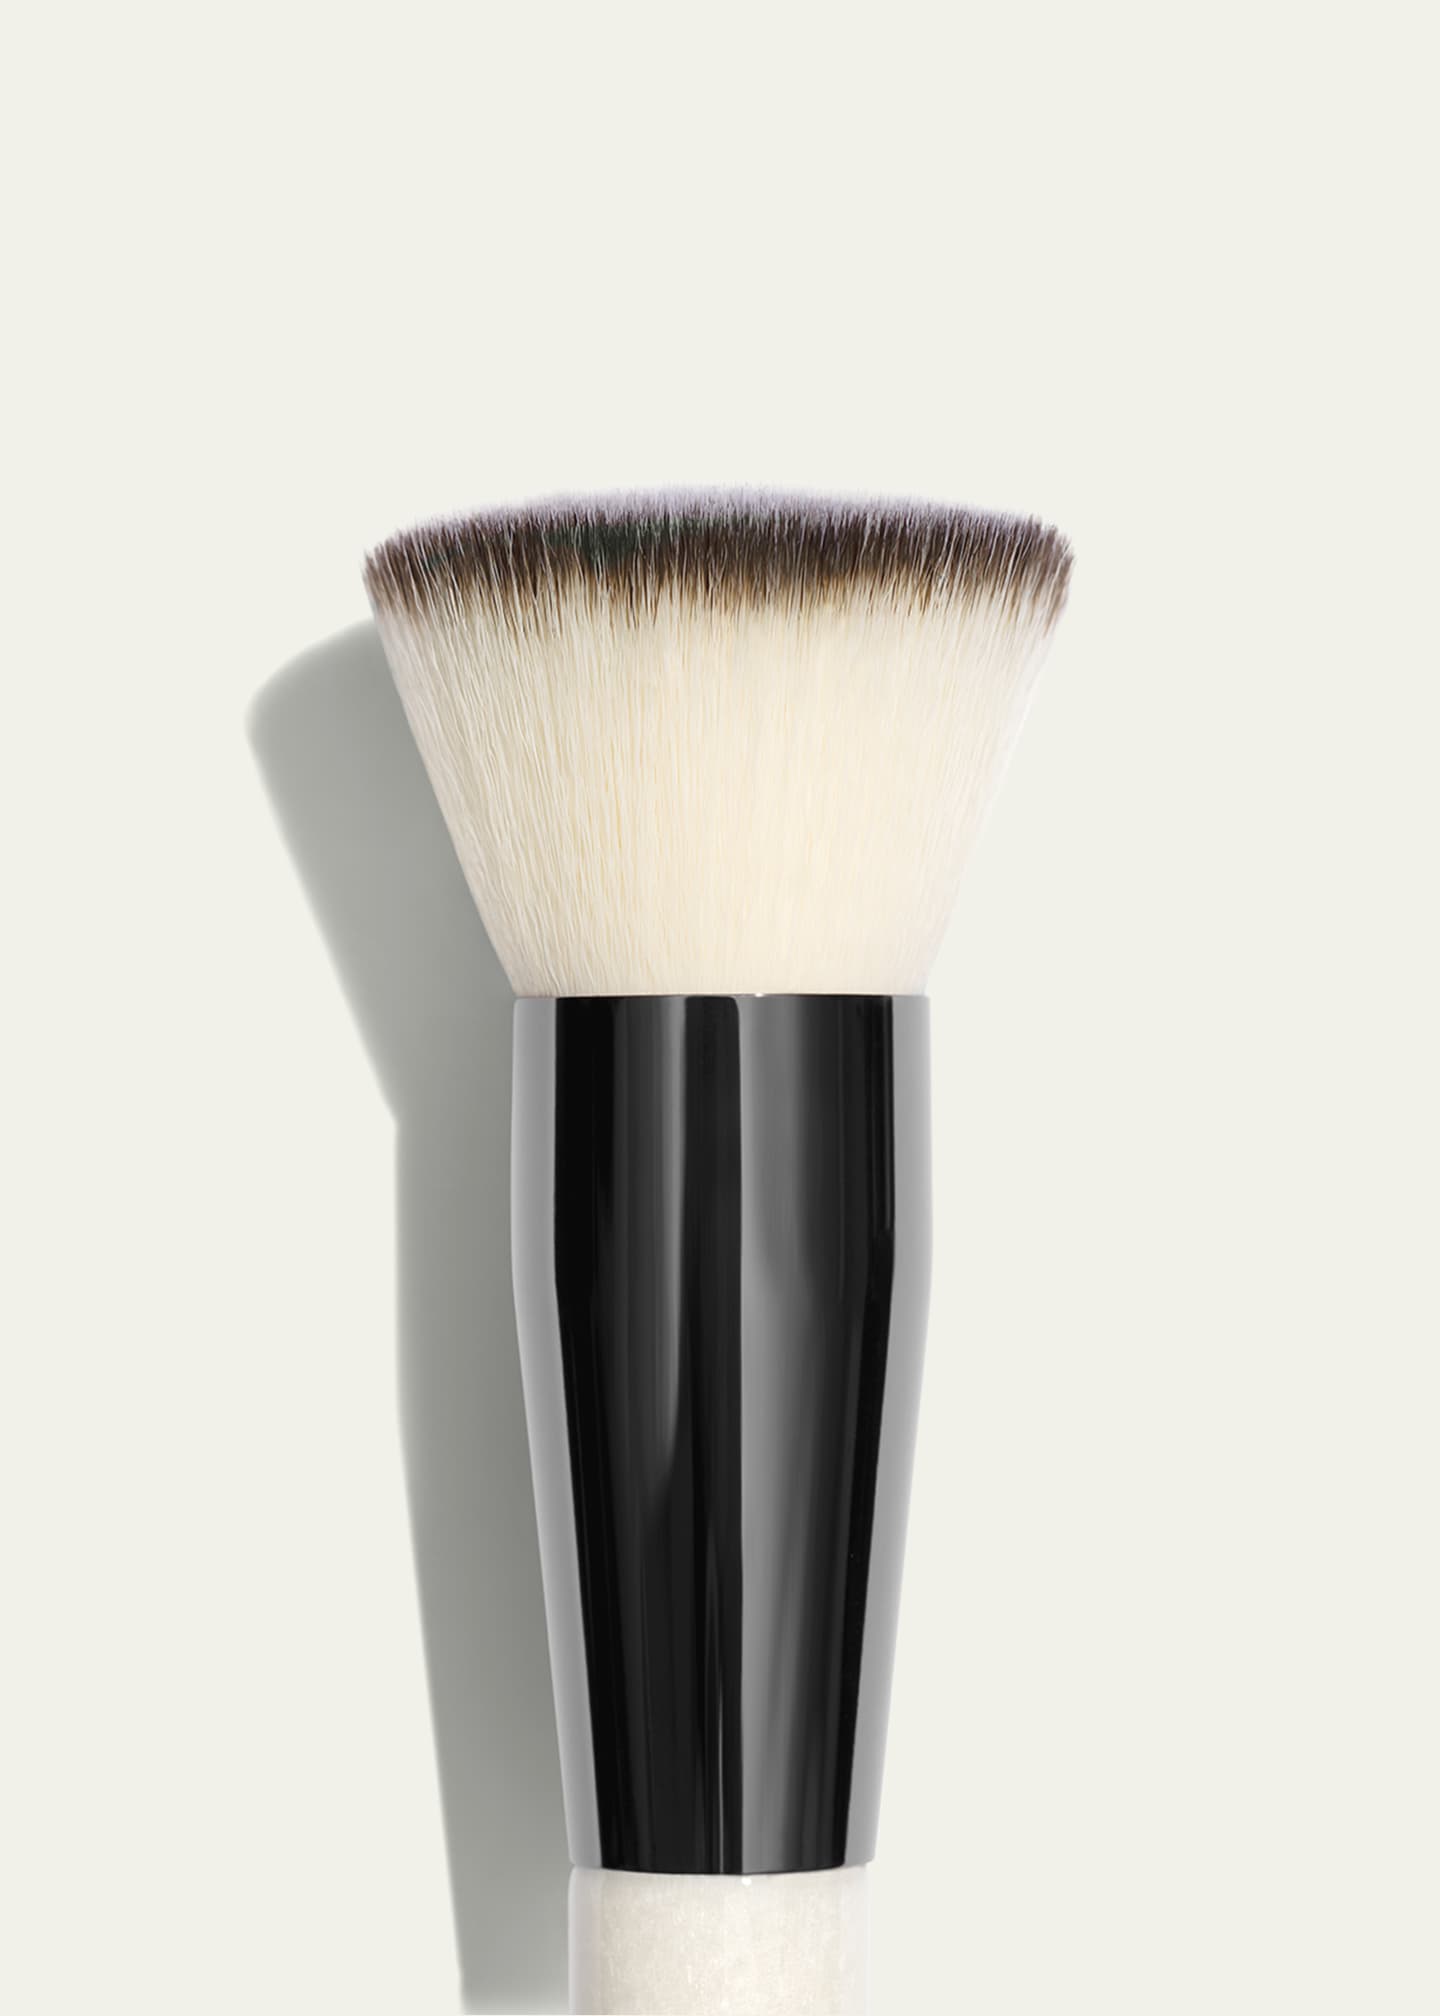 Chantecaille Buff and Blur Brush Image 2 of 2